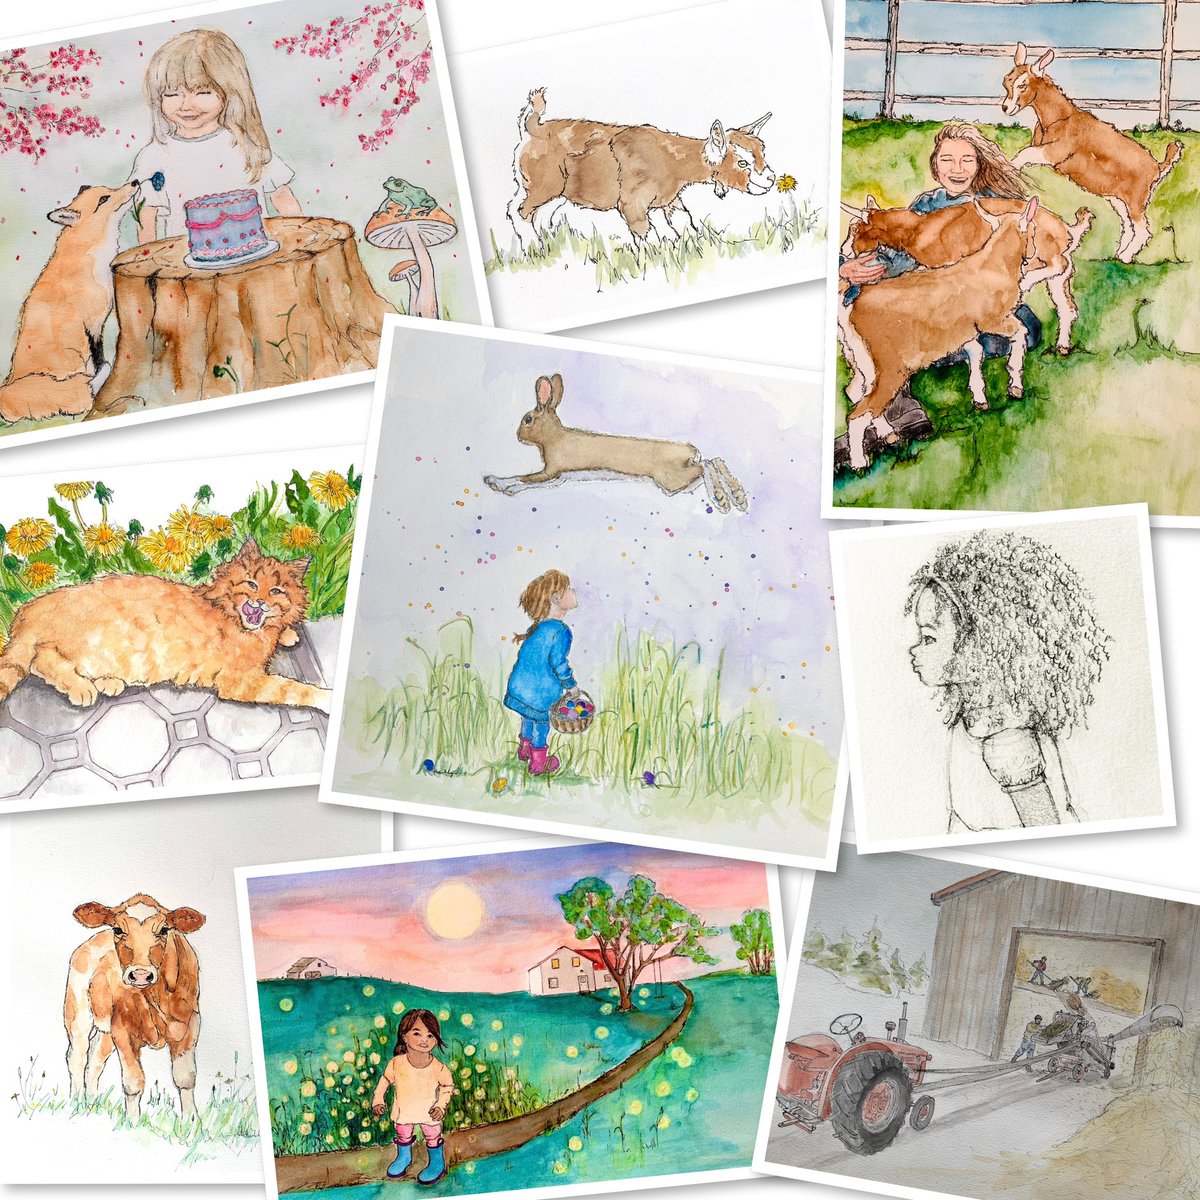 #PortfolioDay #kidlitart #kidlit #illustration #Watercolour #picturebook Interesting in illustrating picture books and other fun projects! Love drawing nature, animals, farm life and people. #nature, #wildlife #farmlife #animals